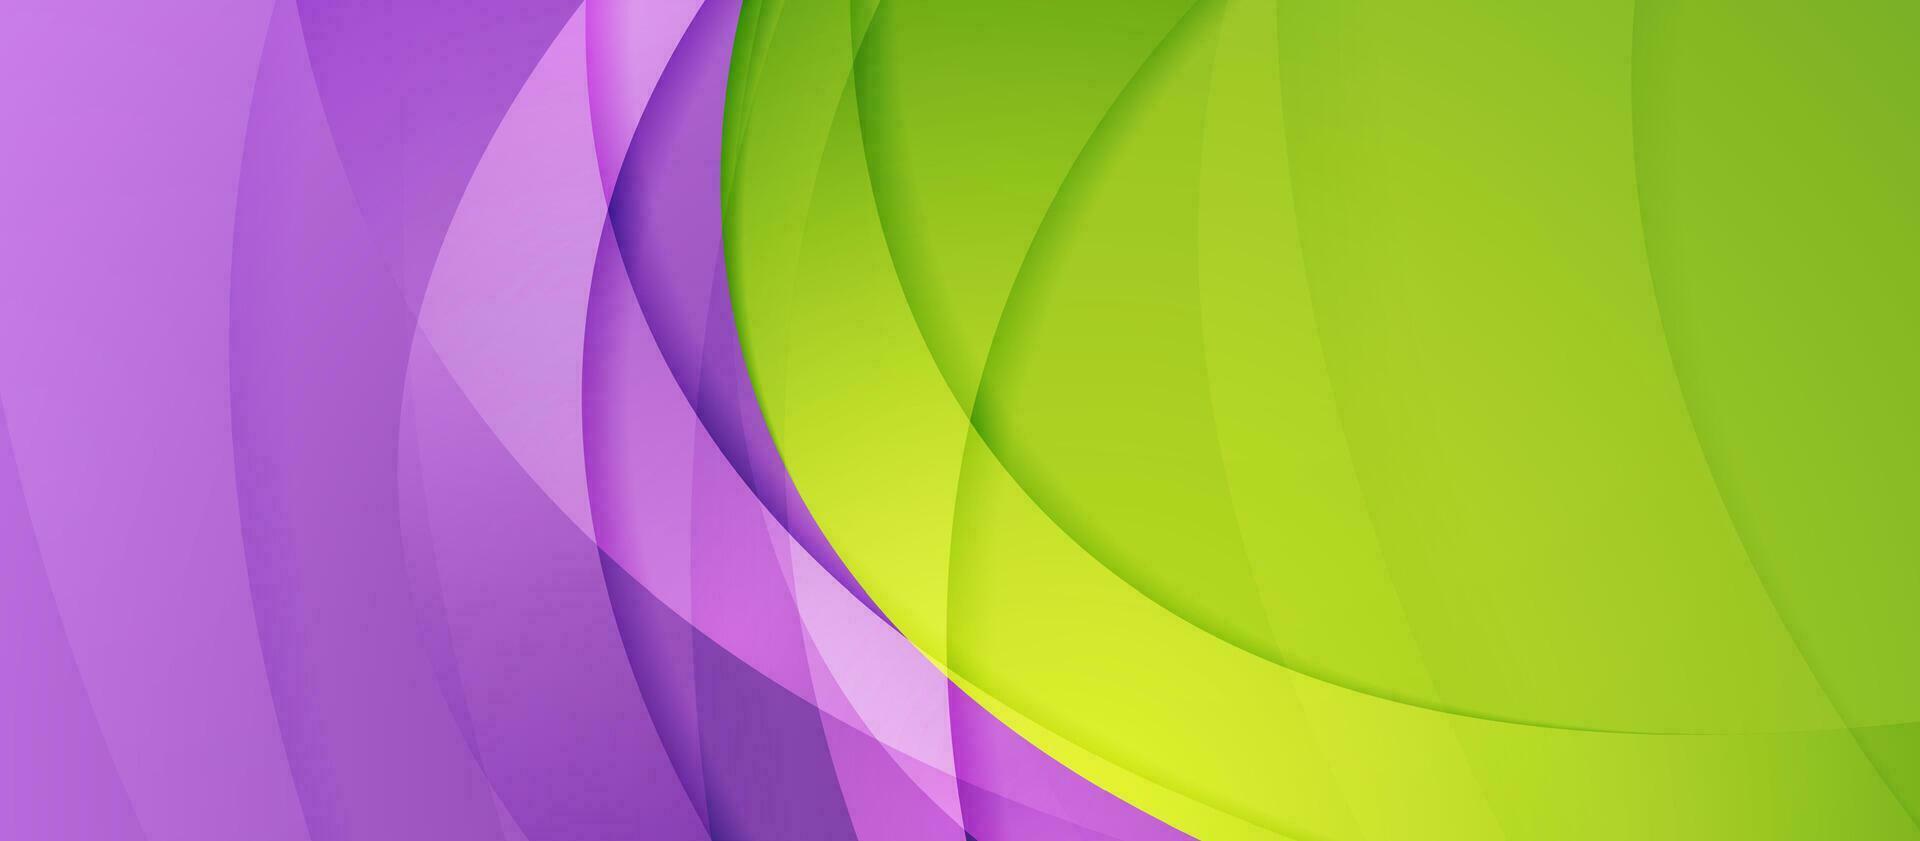 Violet and green elegant waves abstract background vector